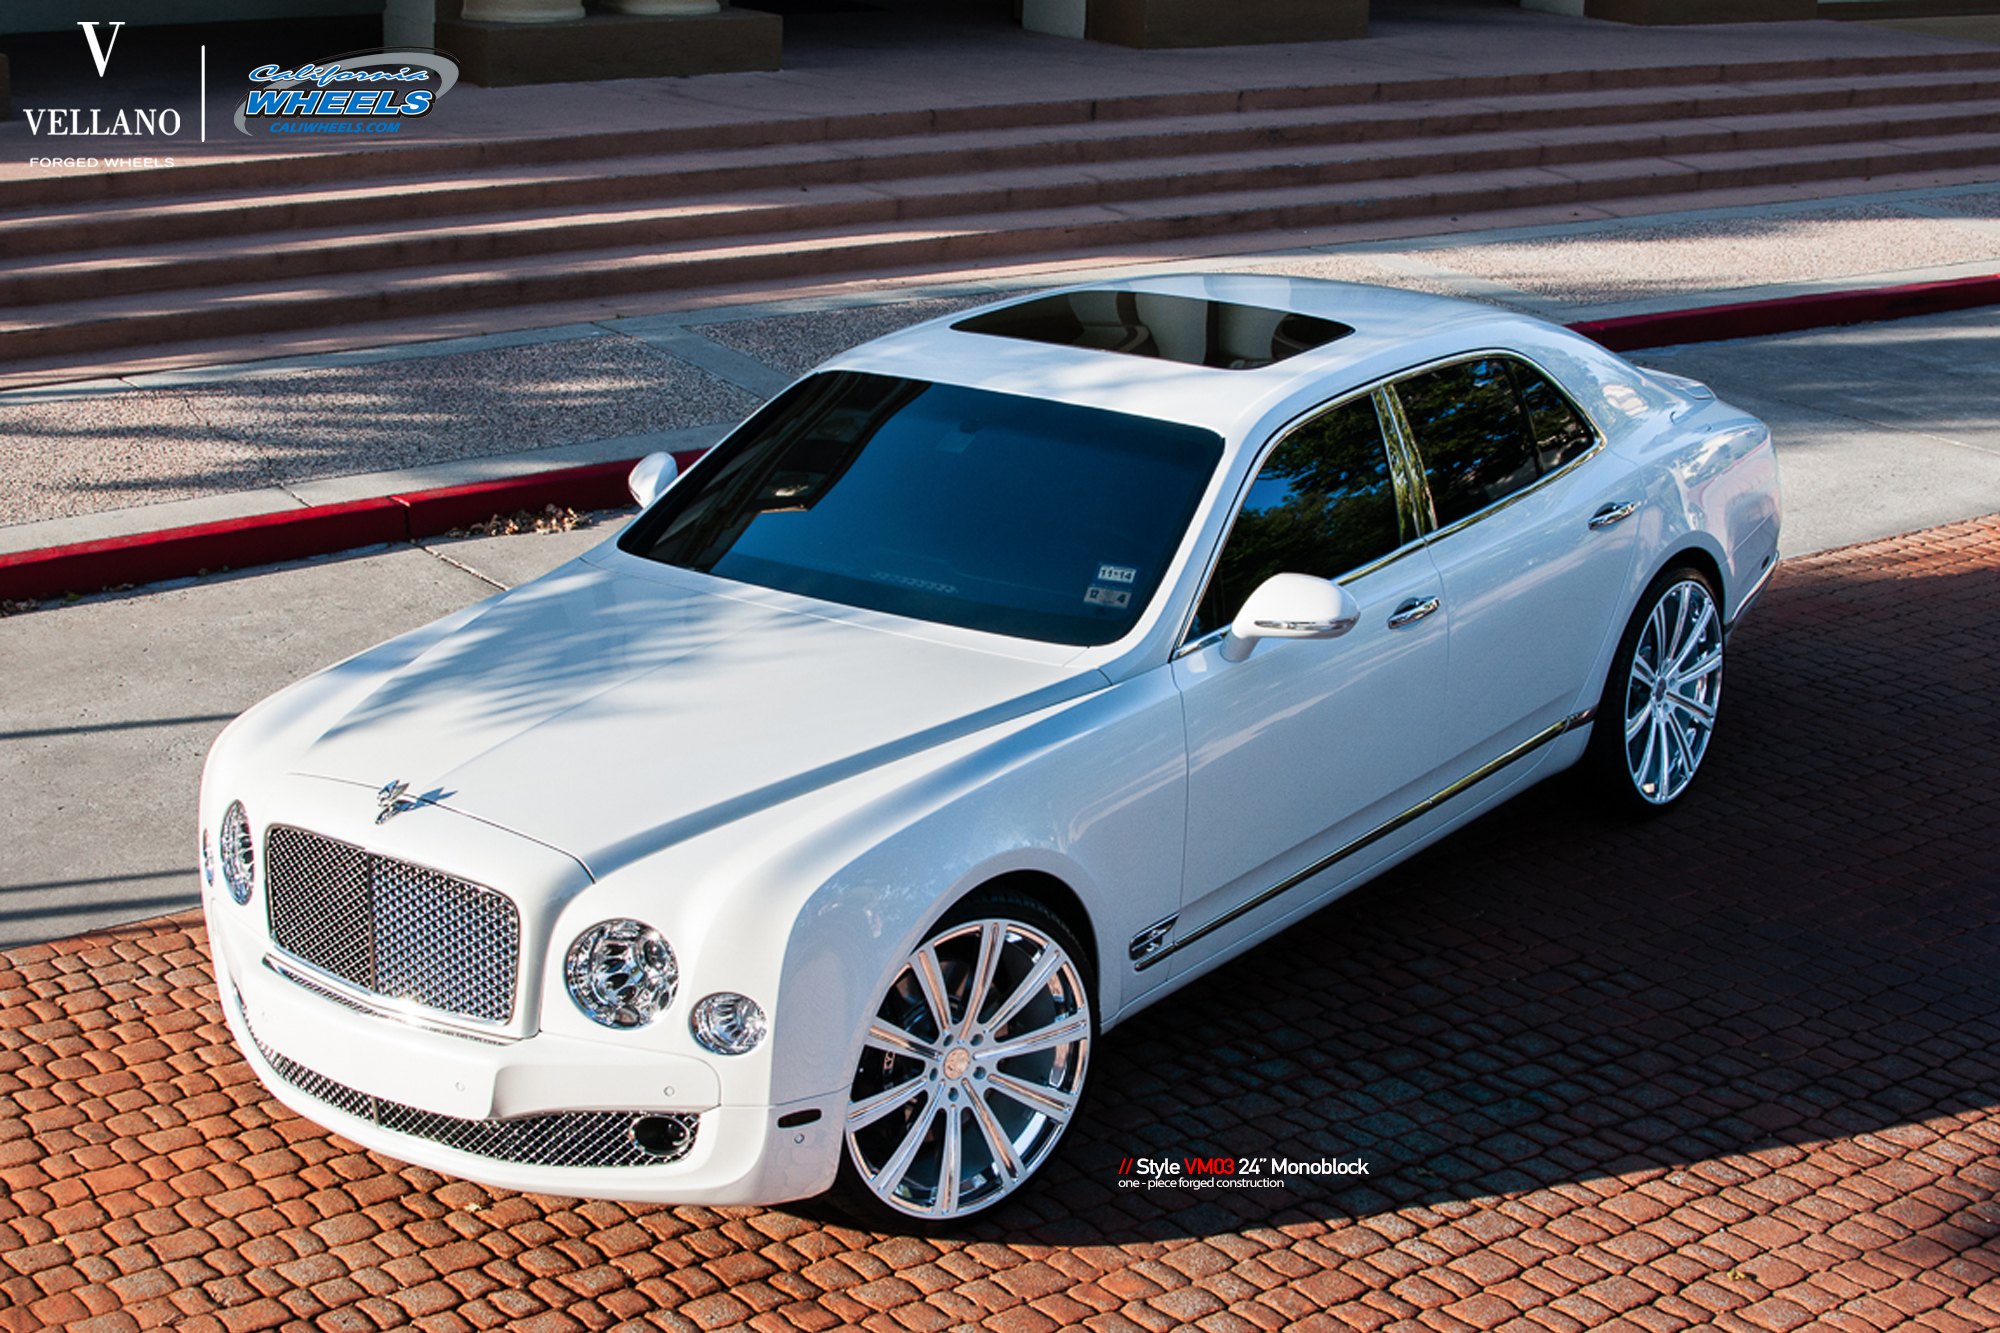 Chrome Mesh Grille on White Bently Mulsanne - Photo by Vellano